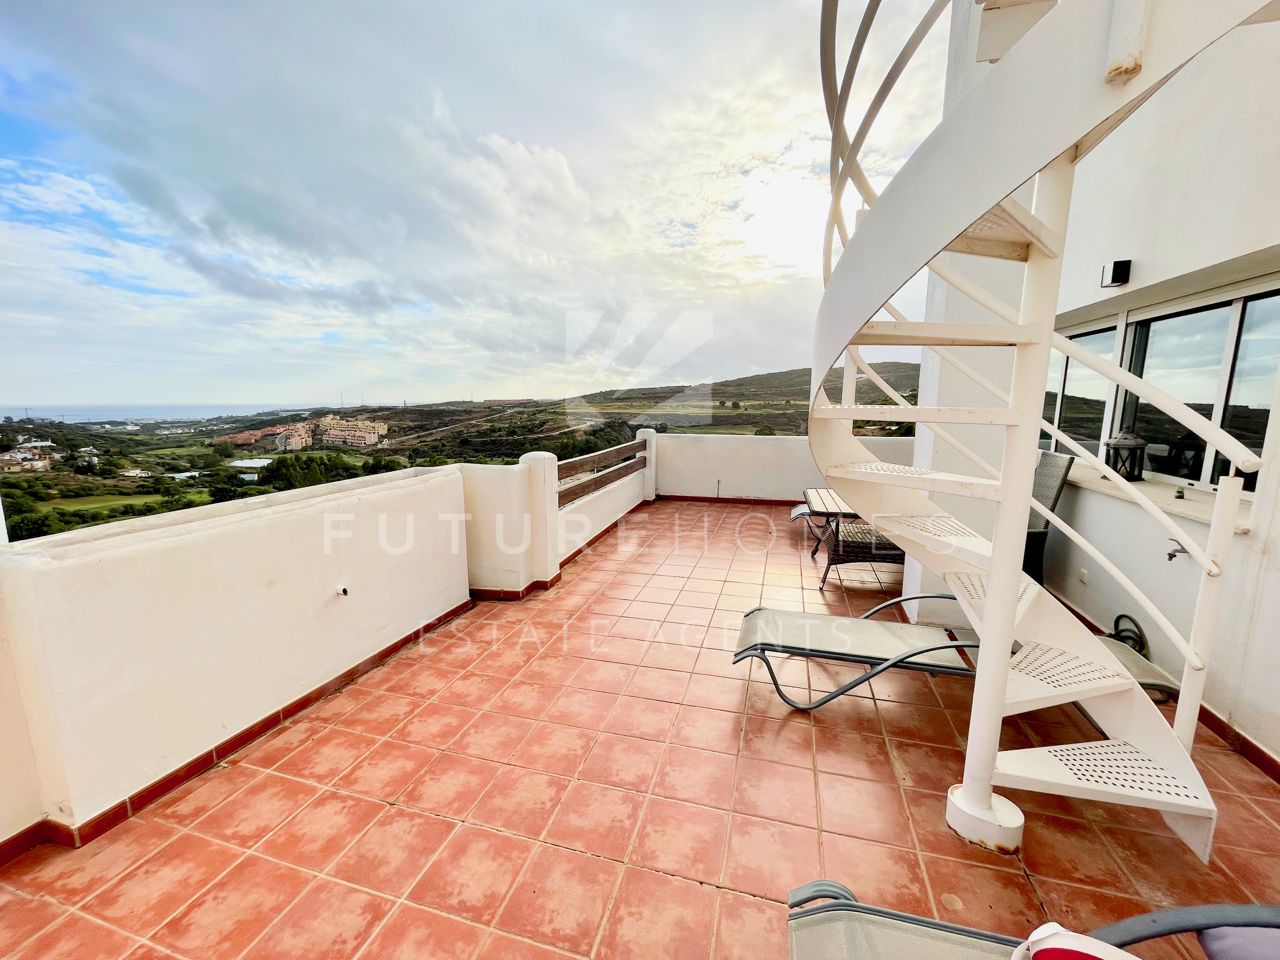 Spacious duplex penthouse apartment with golf and sea views in Valle Romano Estepona